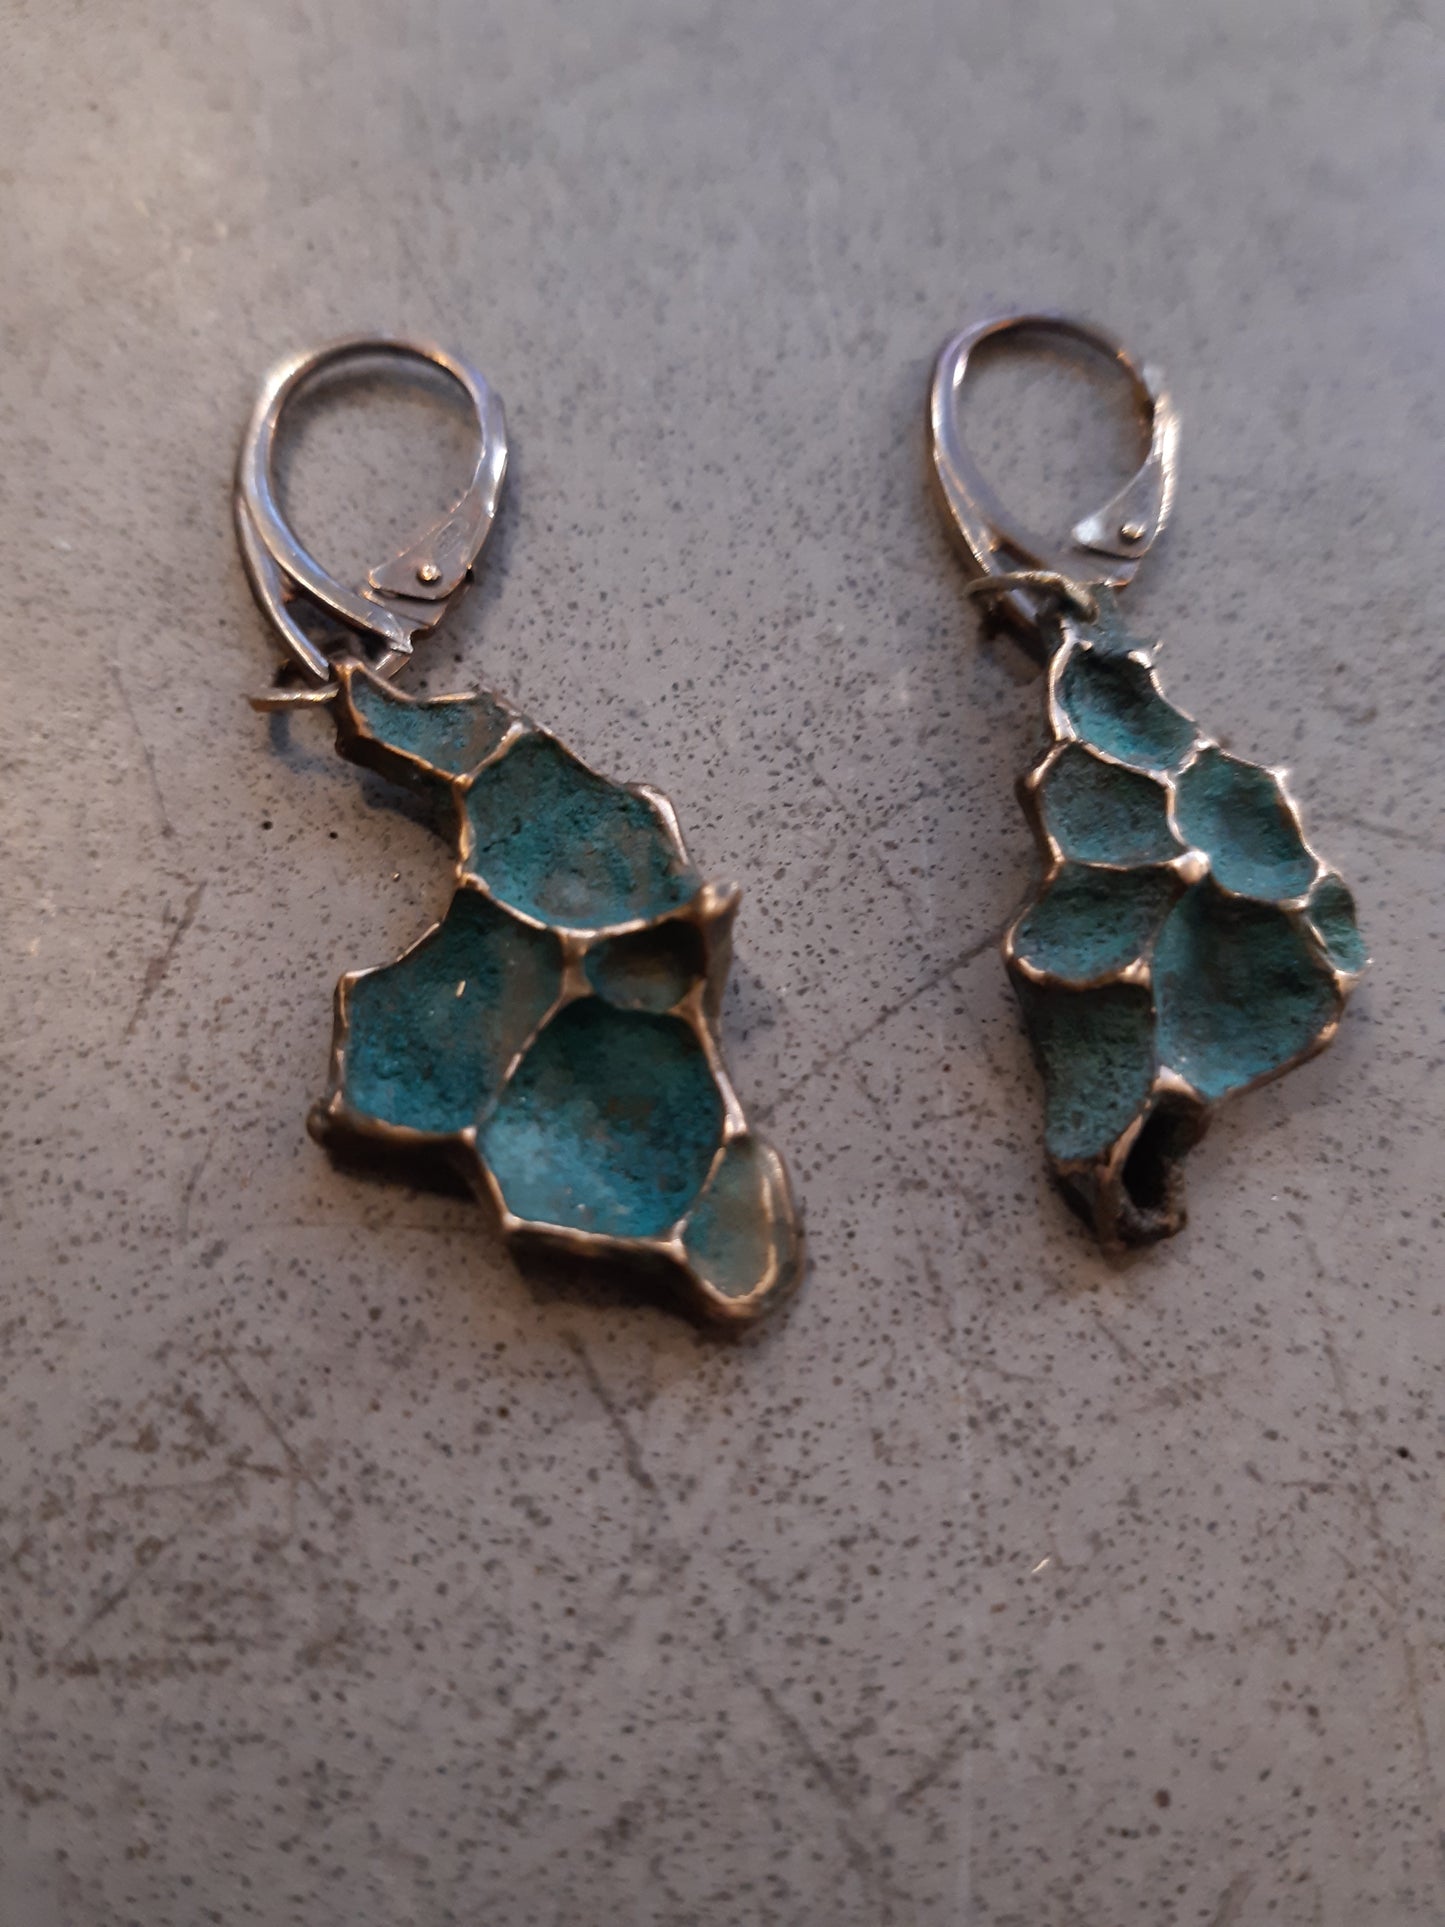 Pomegranate earrings with turquiose or black patina.-Beca Beeby